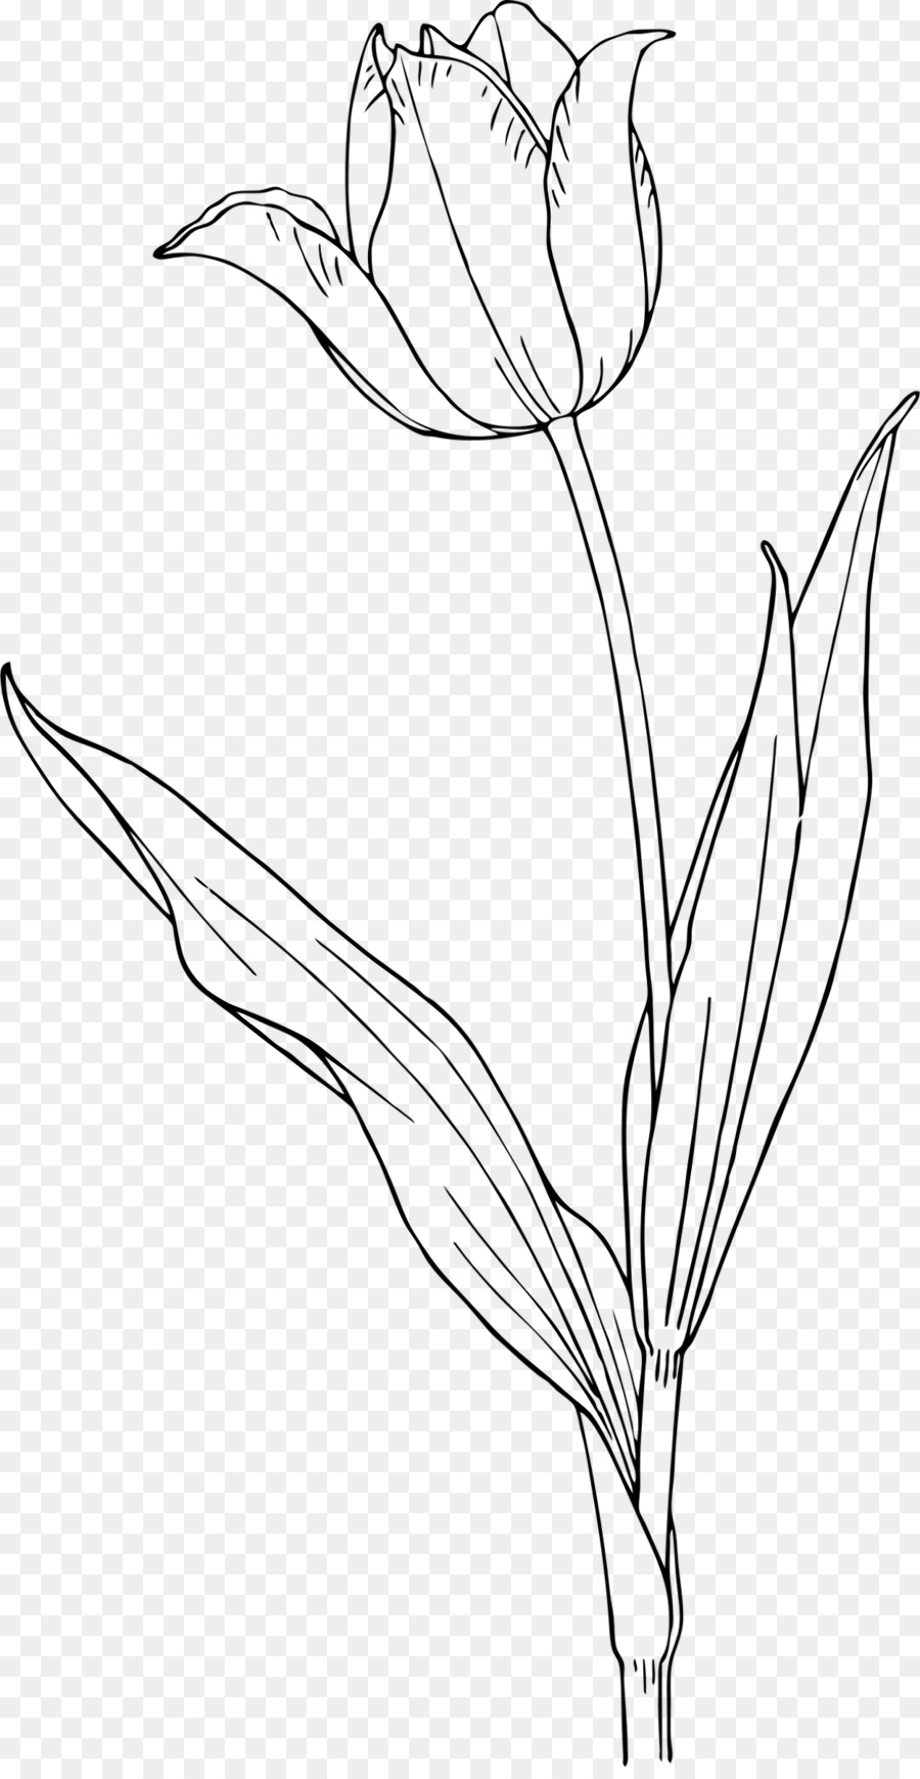 Download High Quality black and white flower clipart tulip Transparent